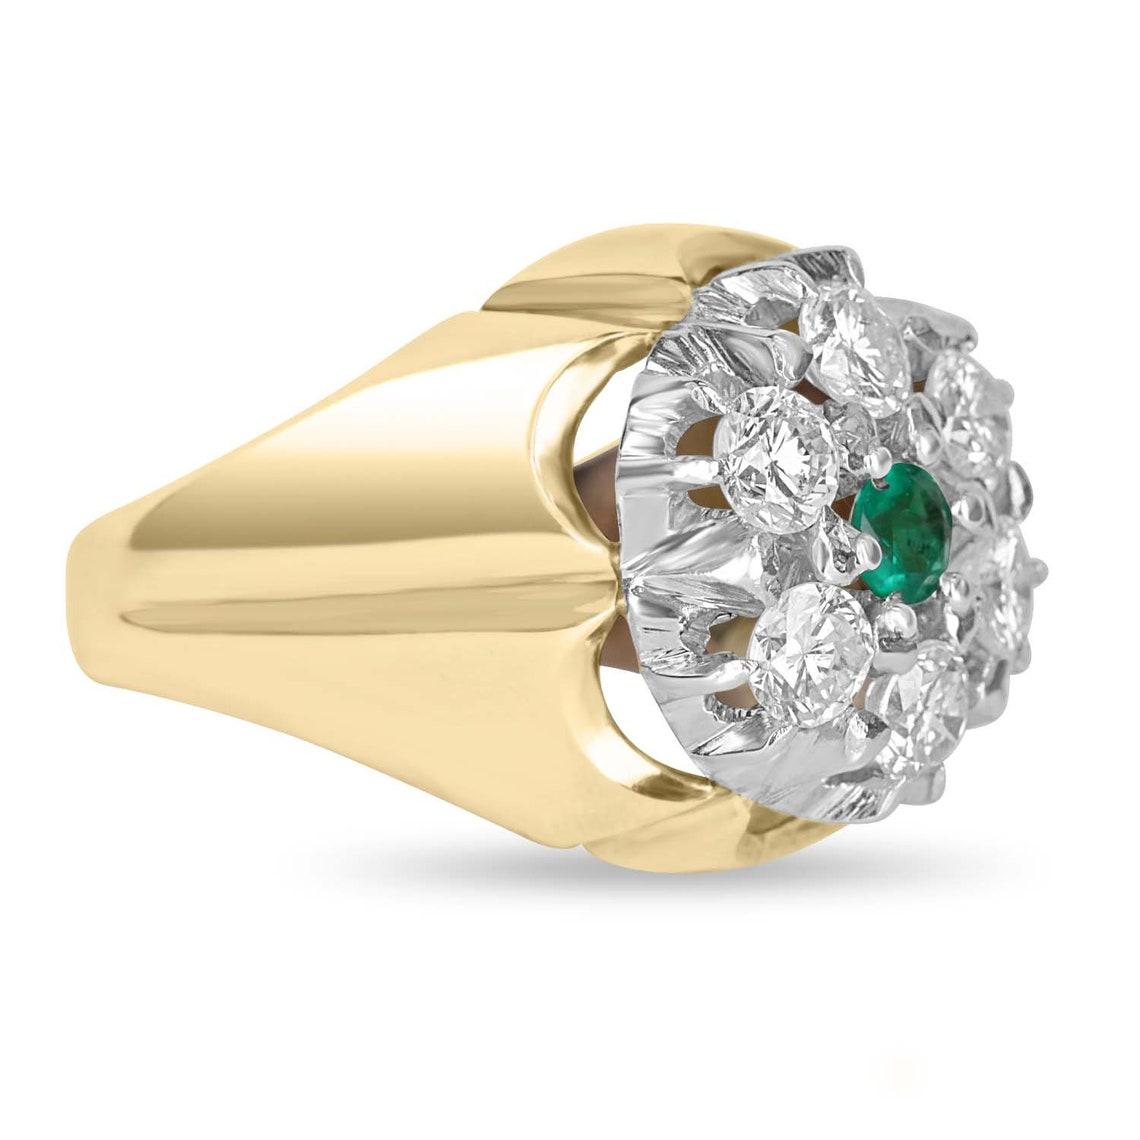 A diamond and emerald men's cluster ring. A 0.30ct round cut, Colombian emerald is set in the very center of this impressive men's ring. Six, large. brilliant round diamonds highlight the sides of the ring and create an eye-catching design. The